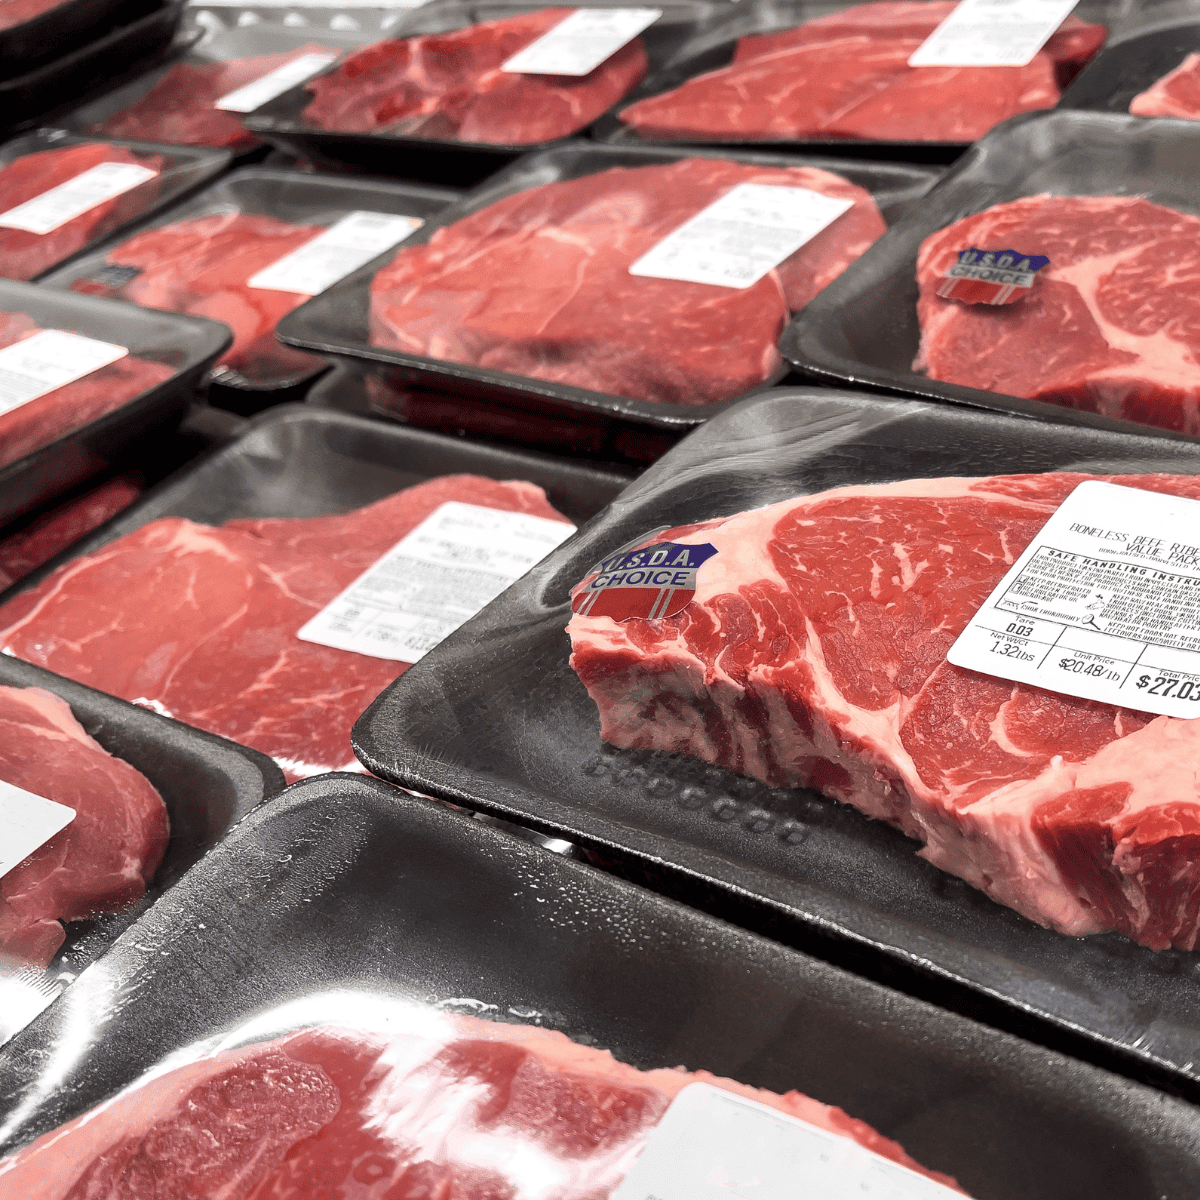 USDA choice steaks at grocery store in packages with USDA stickers